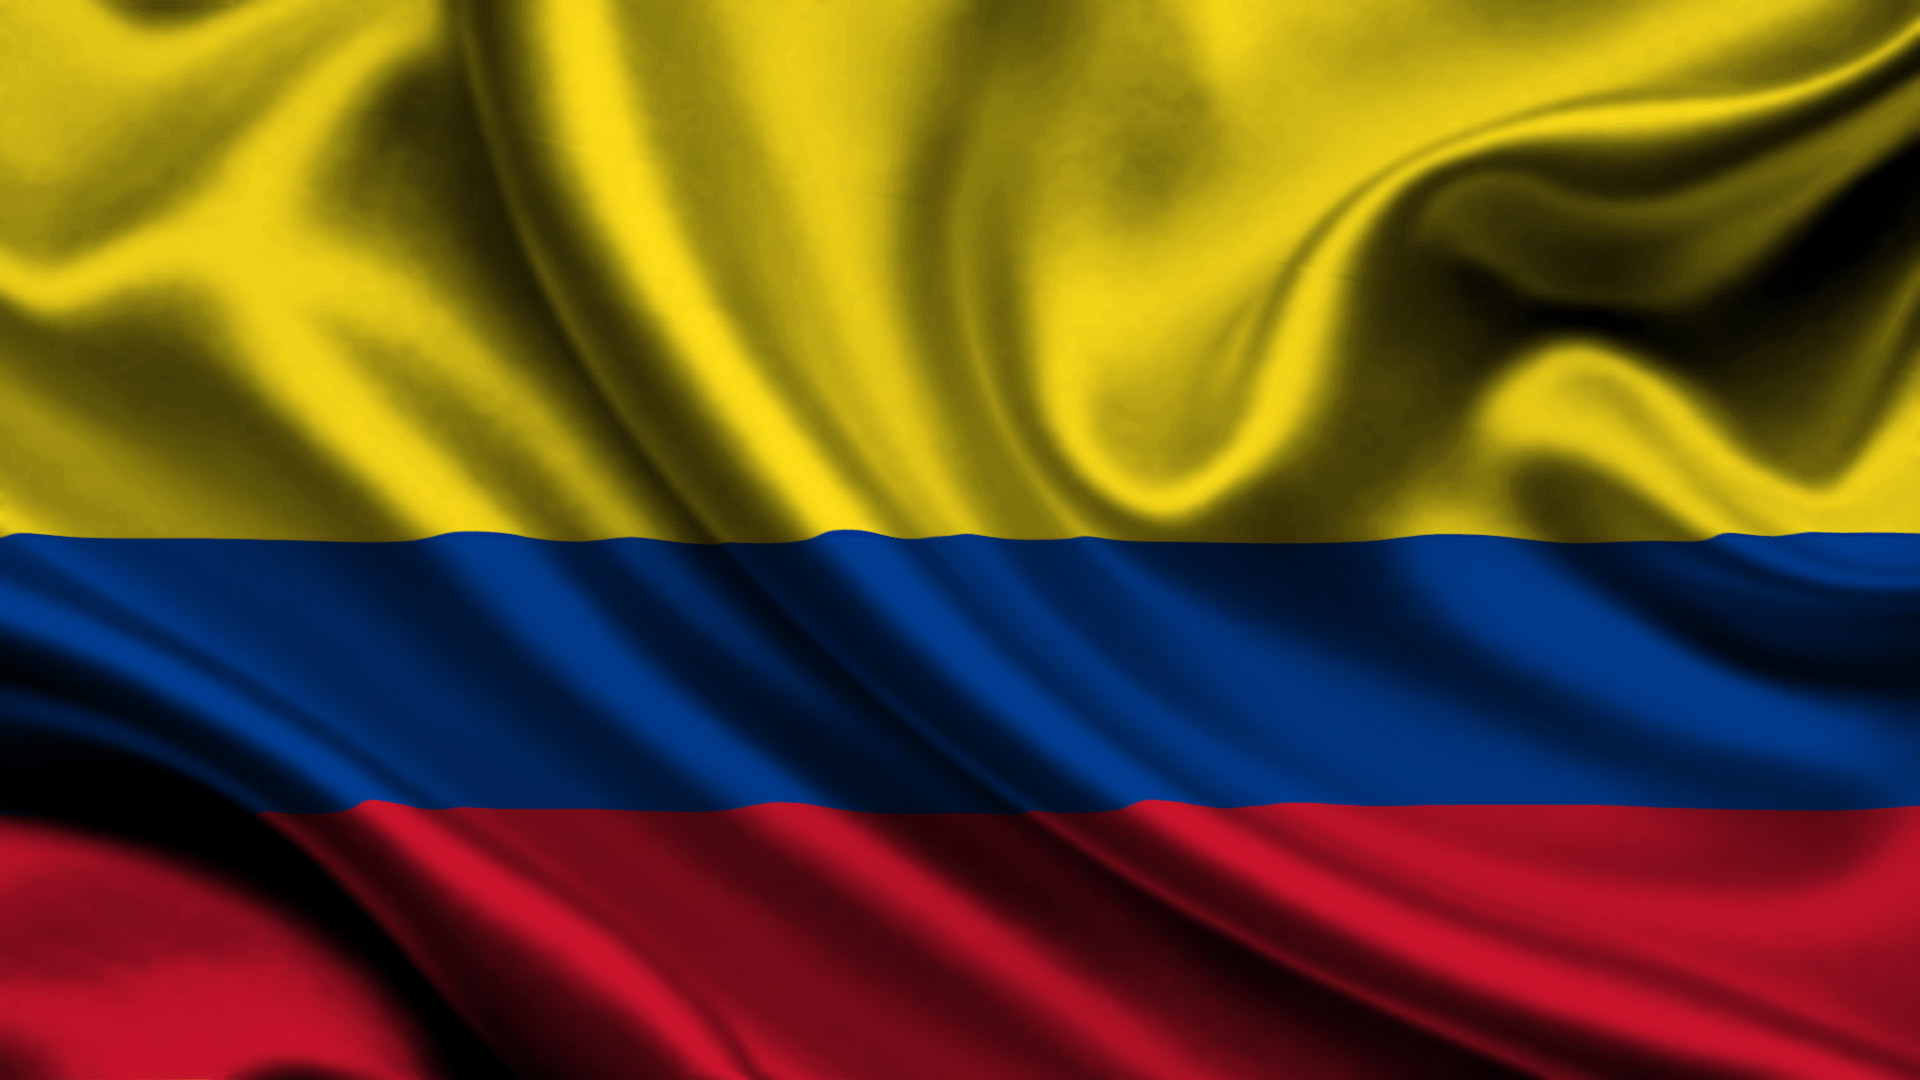 1920x1080 Colombia images Colombia HD wallpaper and background photos